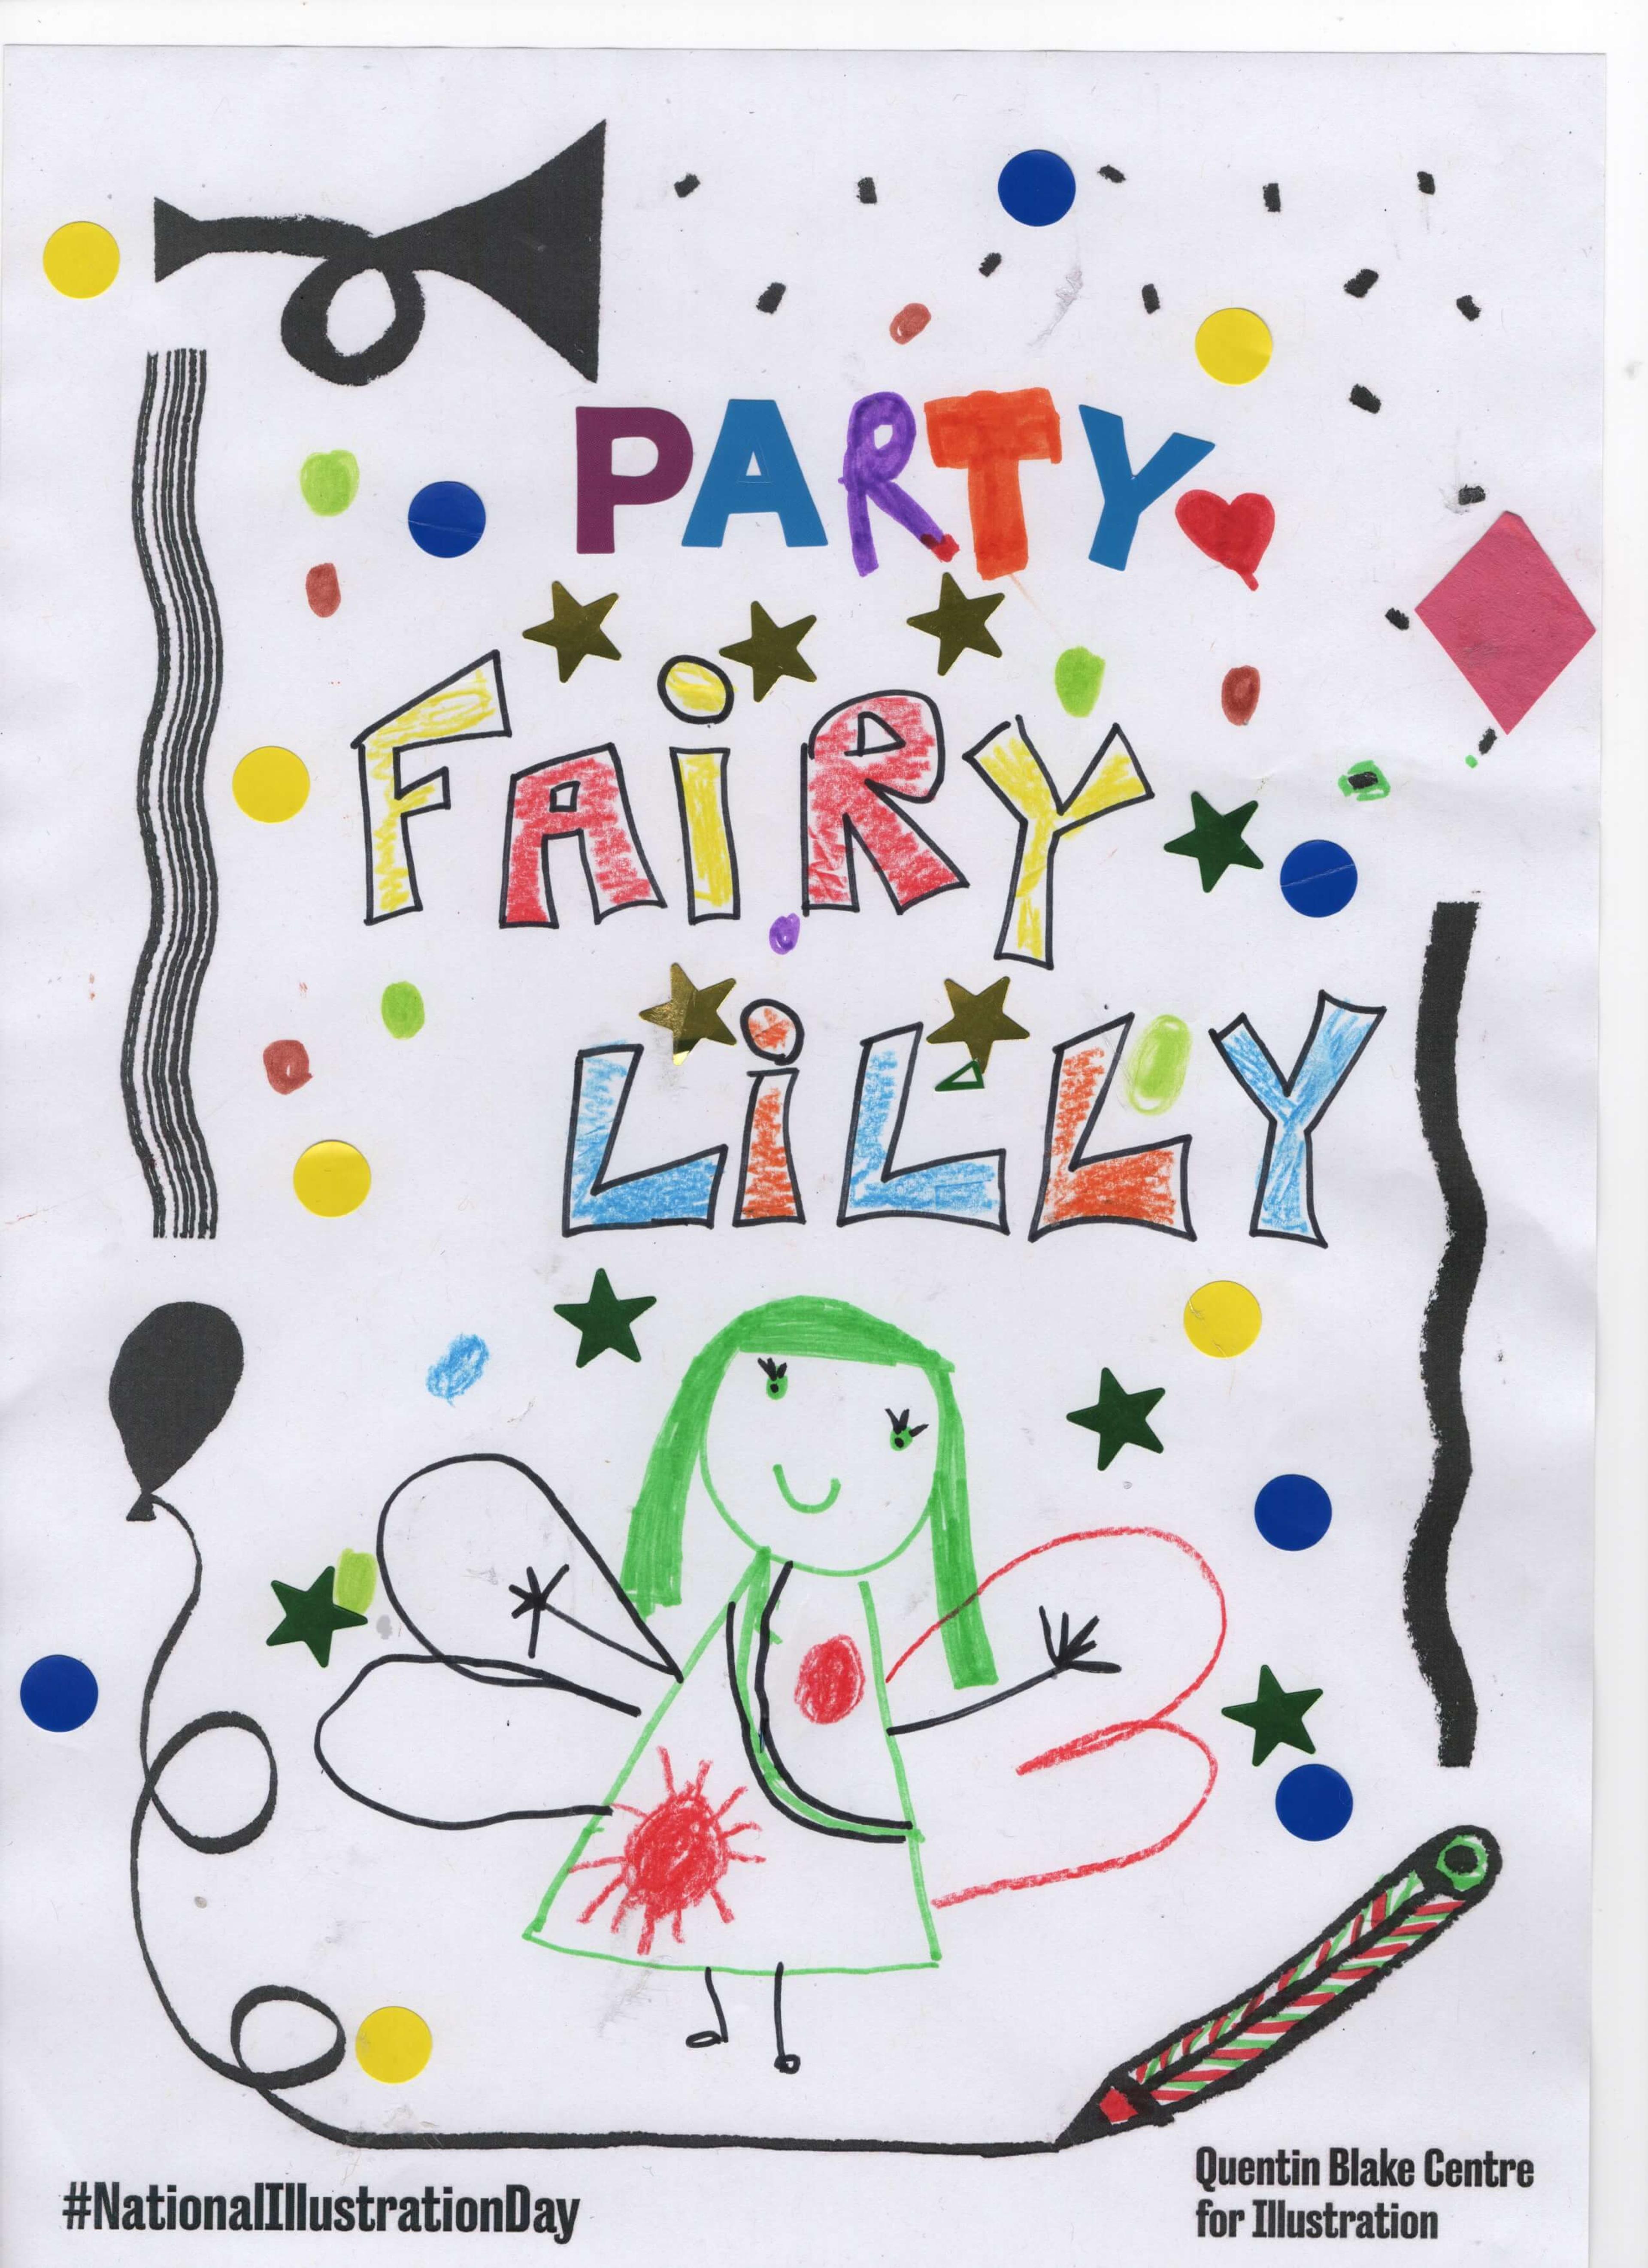 Joyful drawing of a winged child with long hair and a dress. The background is full of stars and confetti. The picture includes the words "Party Fairy Lilly".